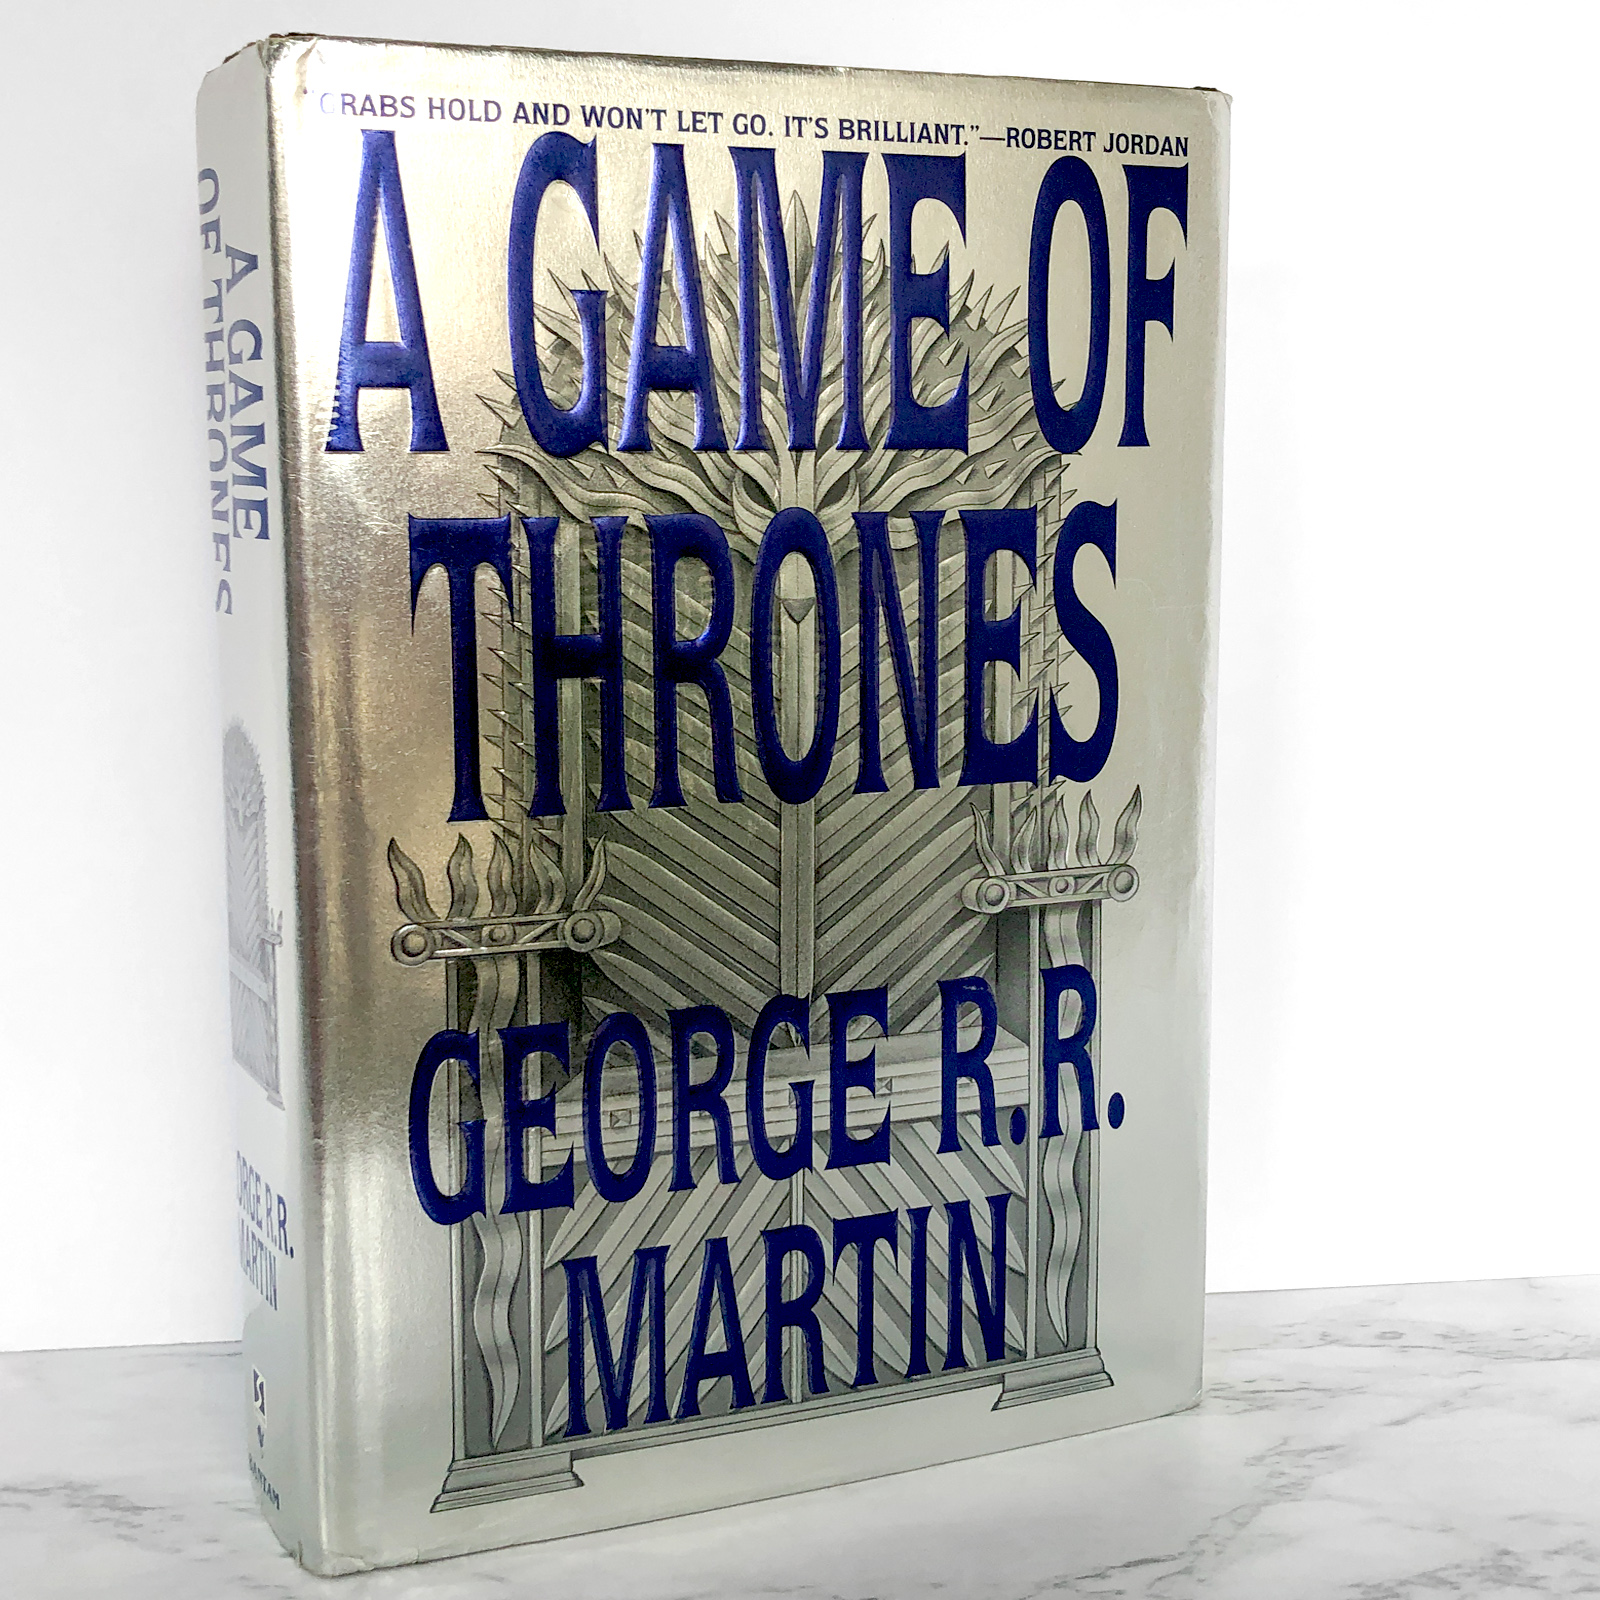 Game of Thrones Books 1-3 by George R. R. Martin , Paperback